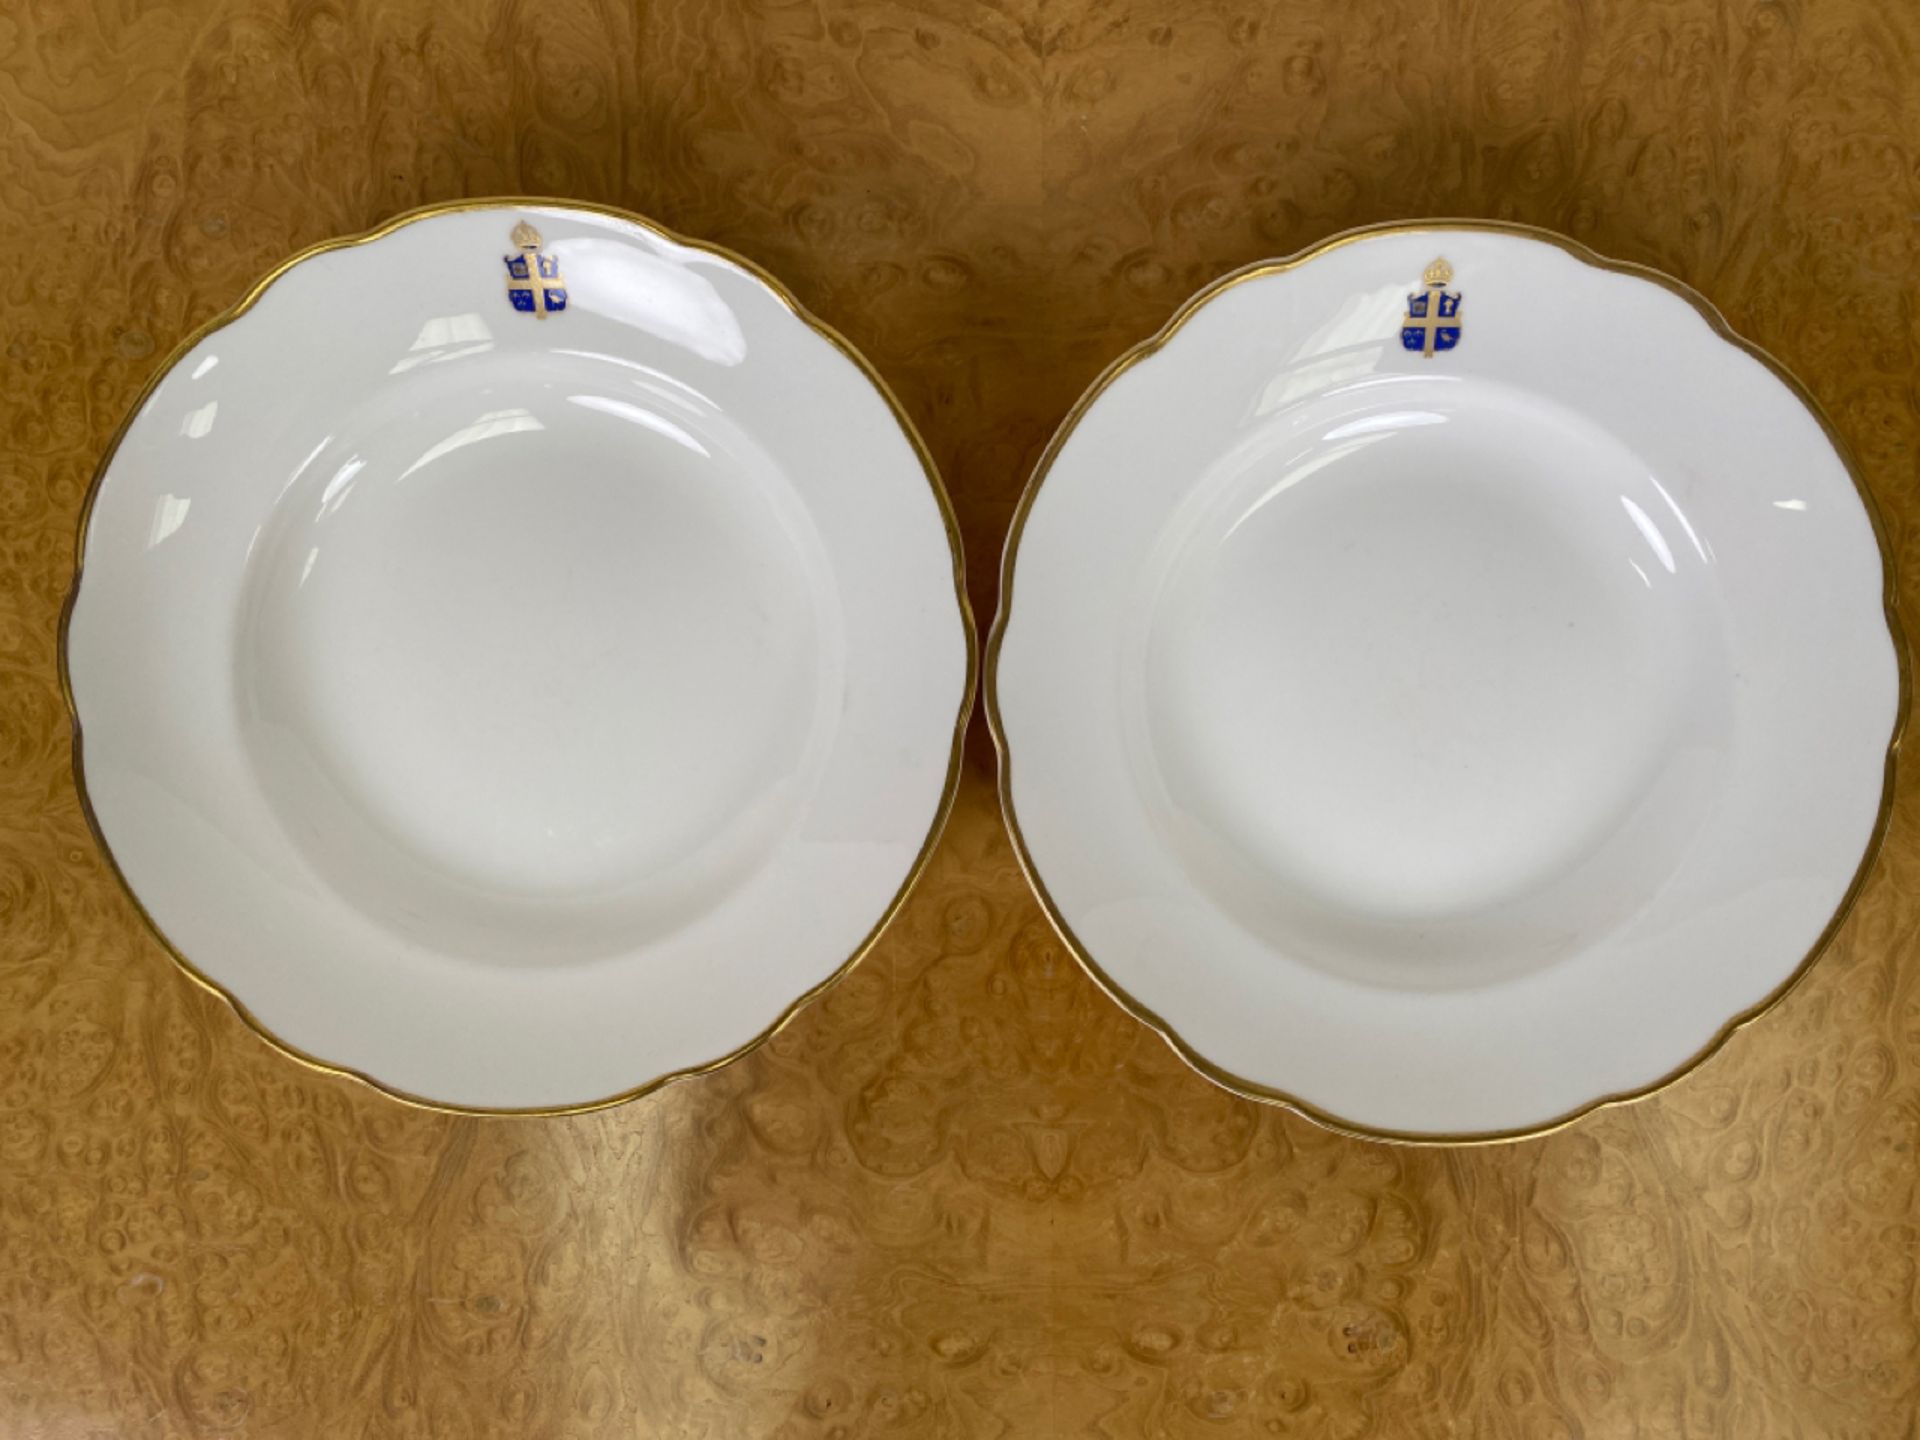 Set of Crested Crockery for Claridge's by Chommette 1884 - Image 31 of 36